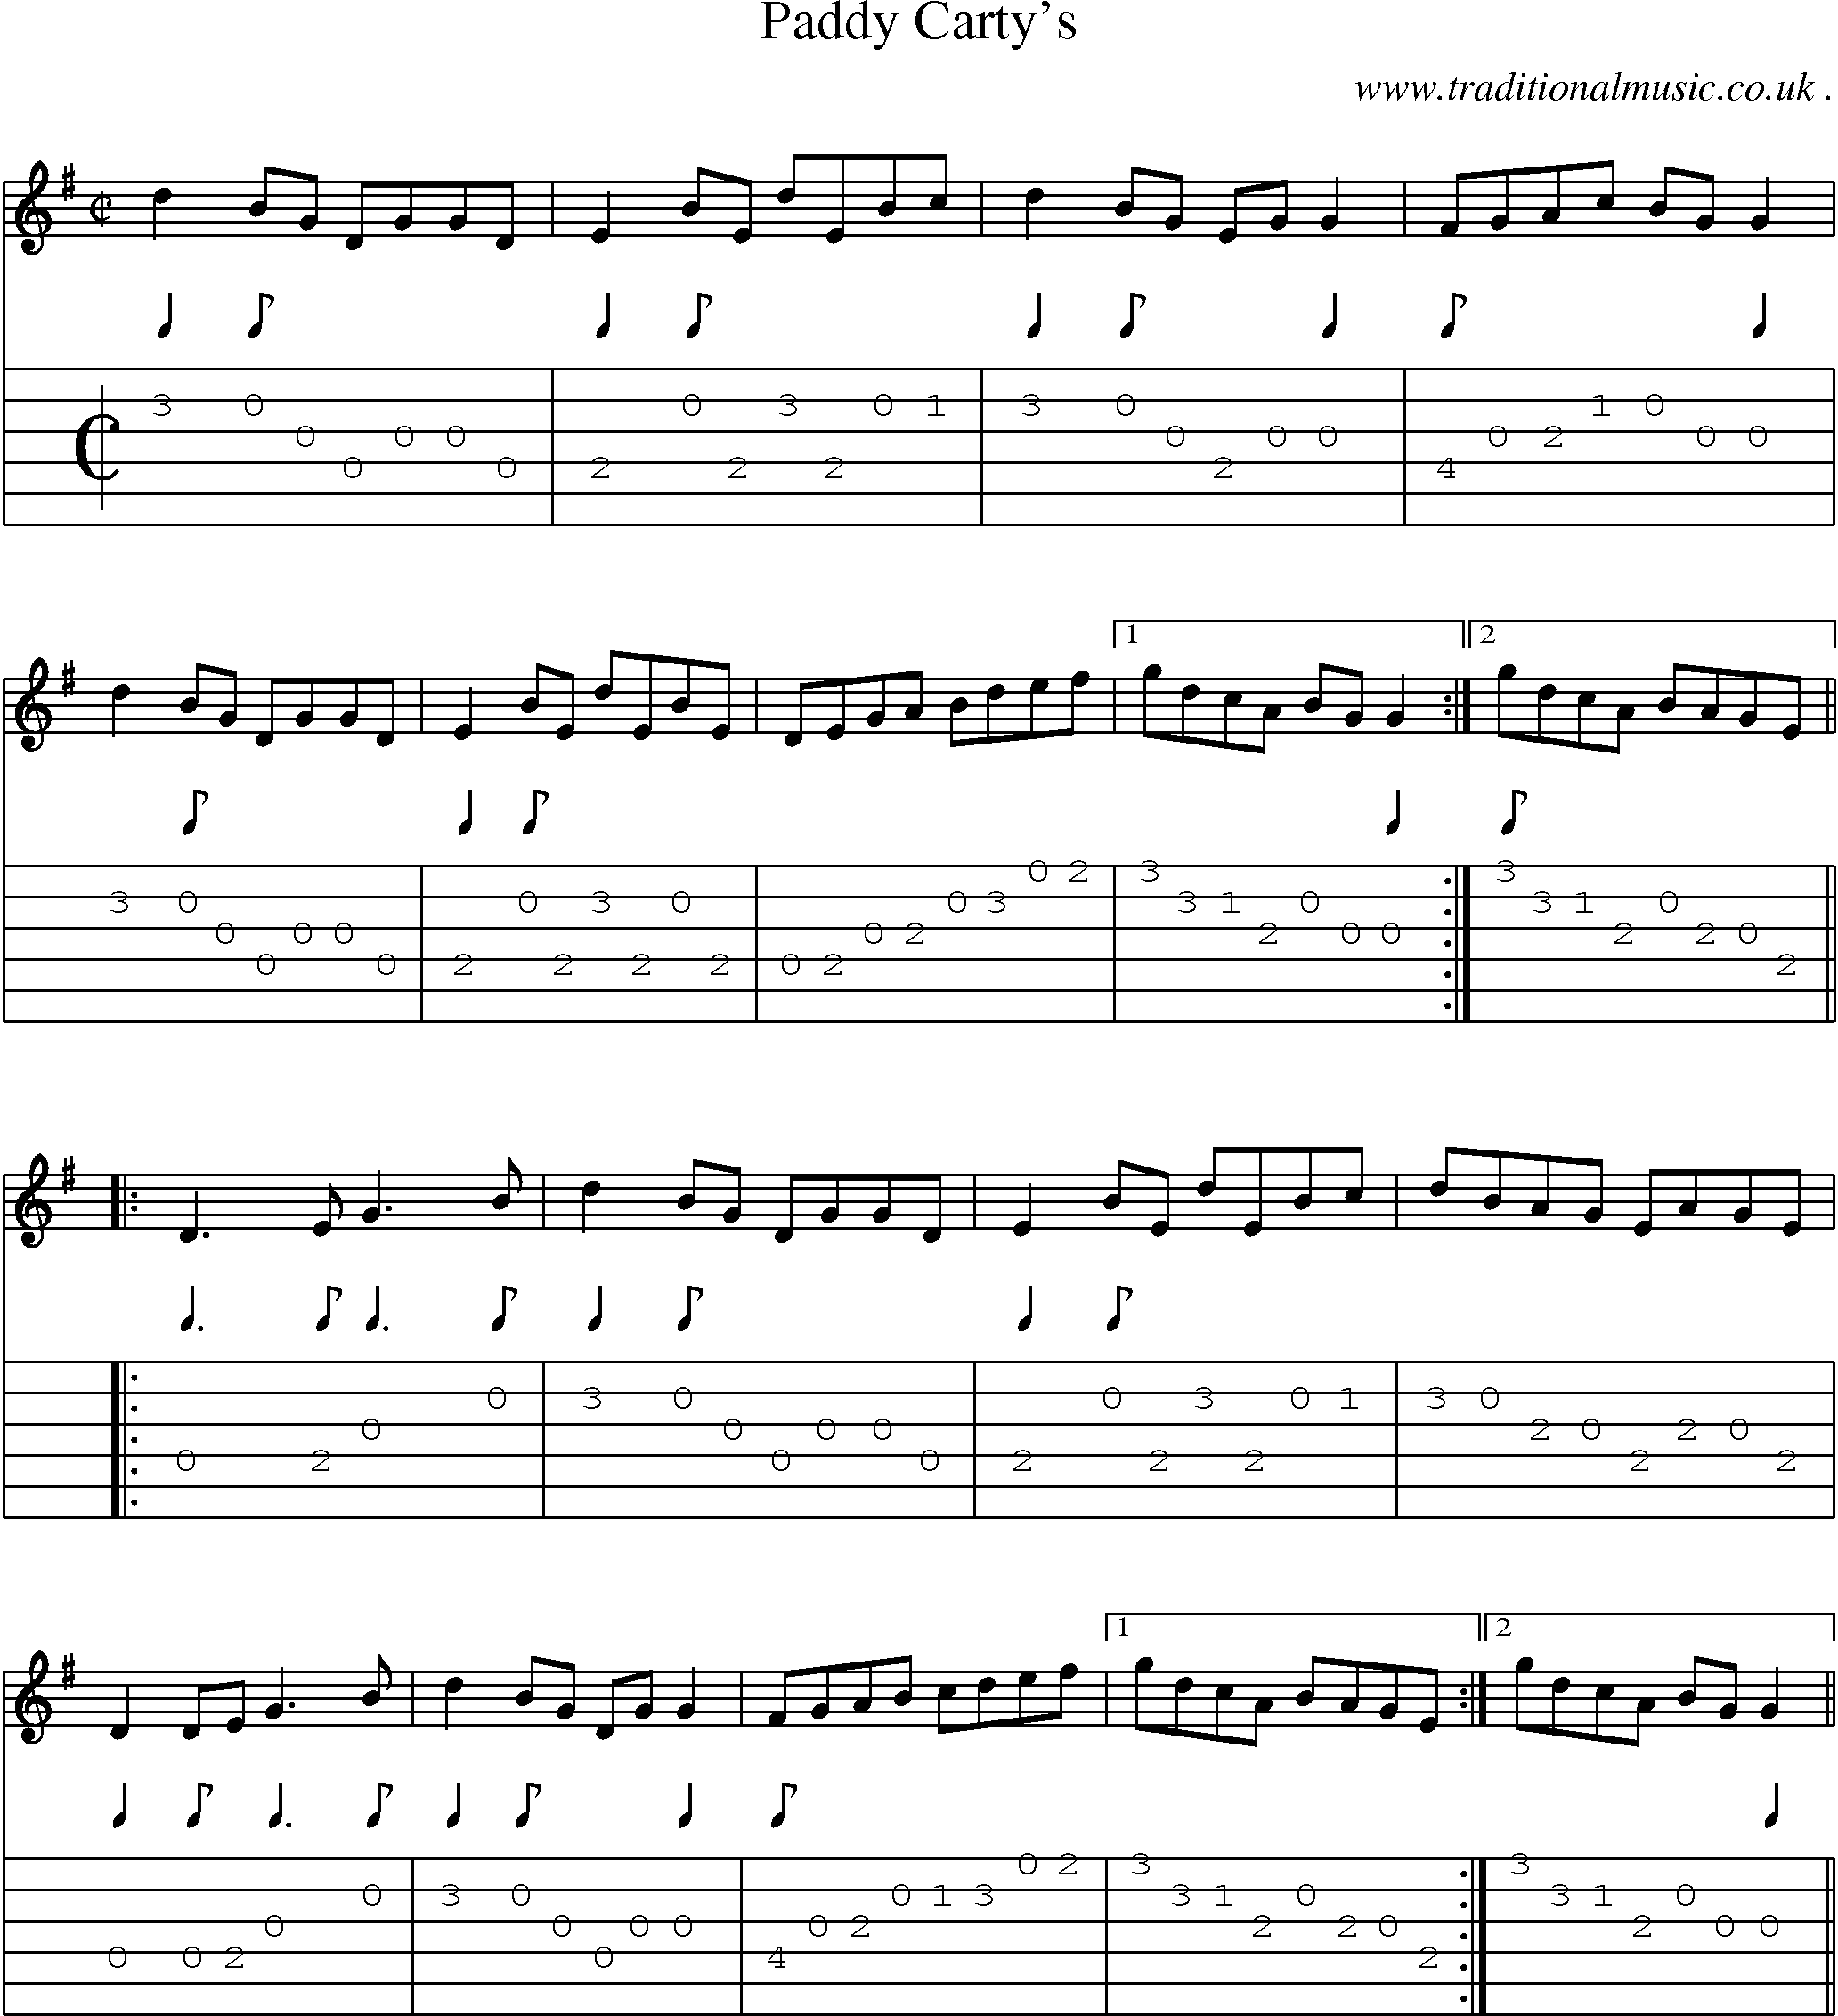 Sheet-Music and Guitar Tabs for Paddy Cartys